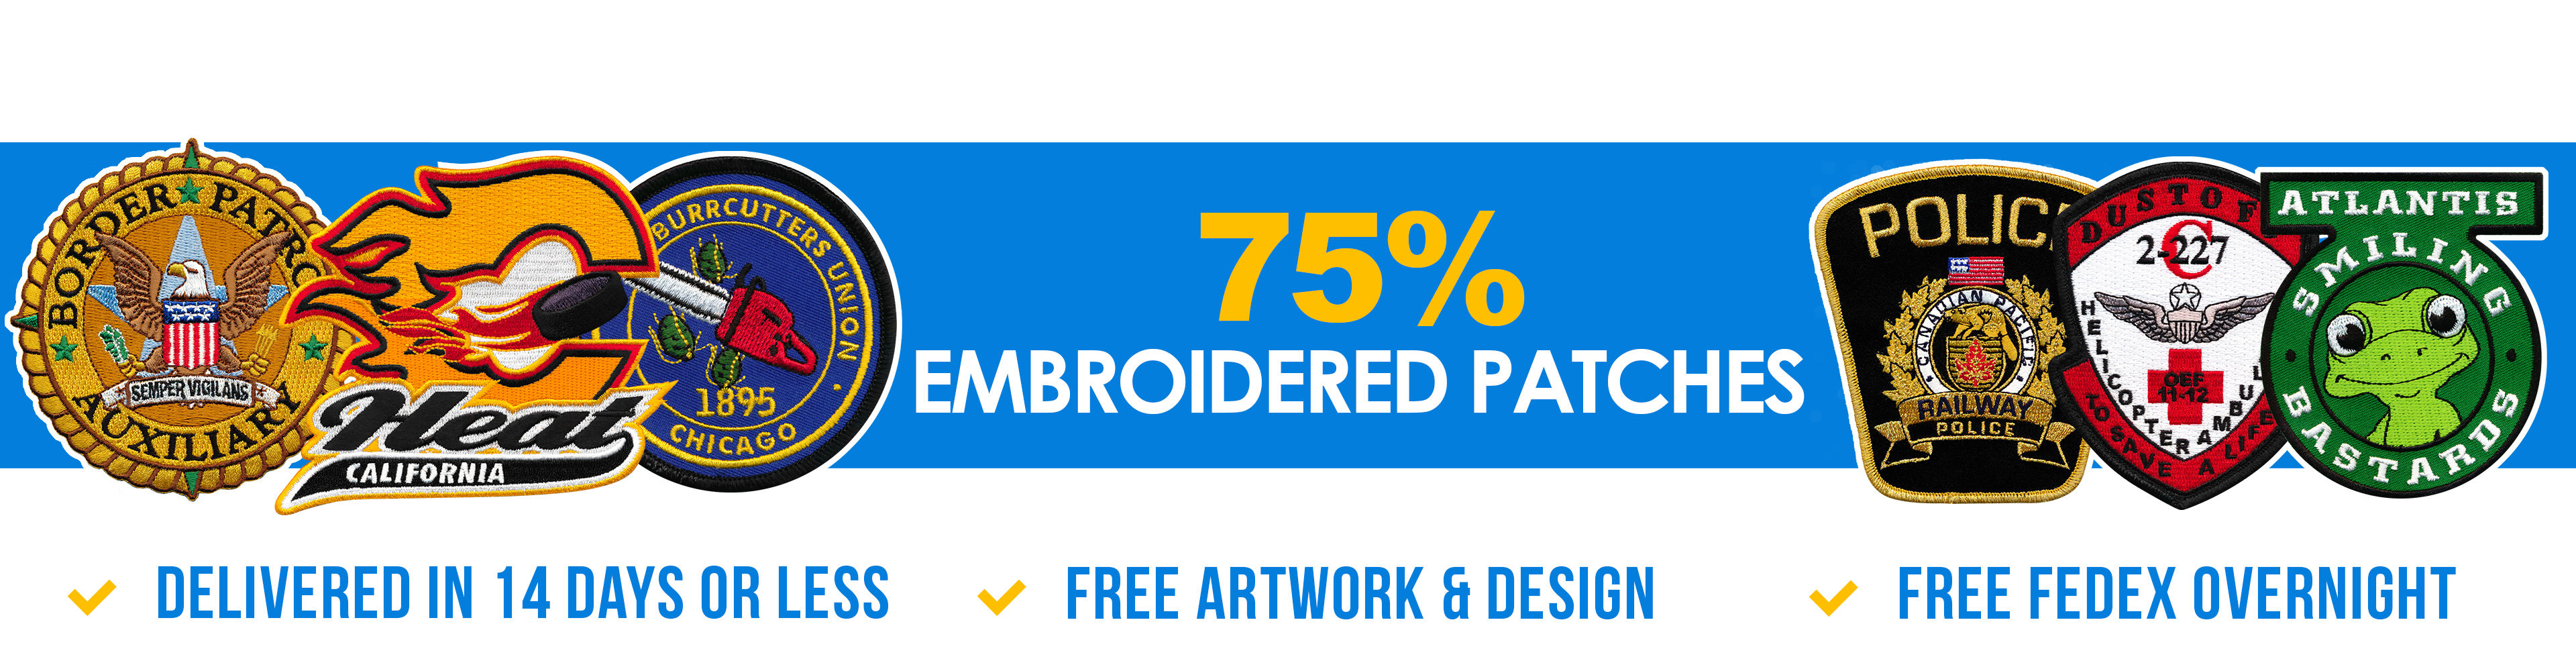 75-percent-embroidered patches